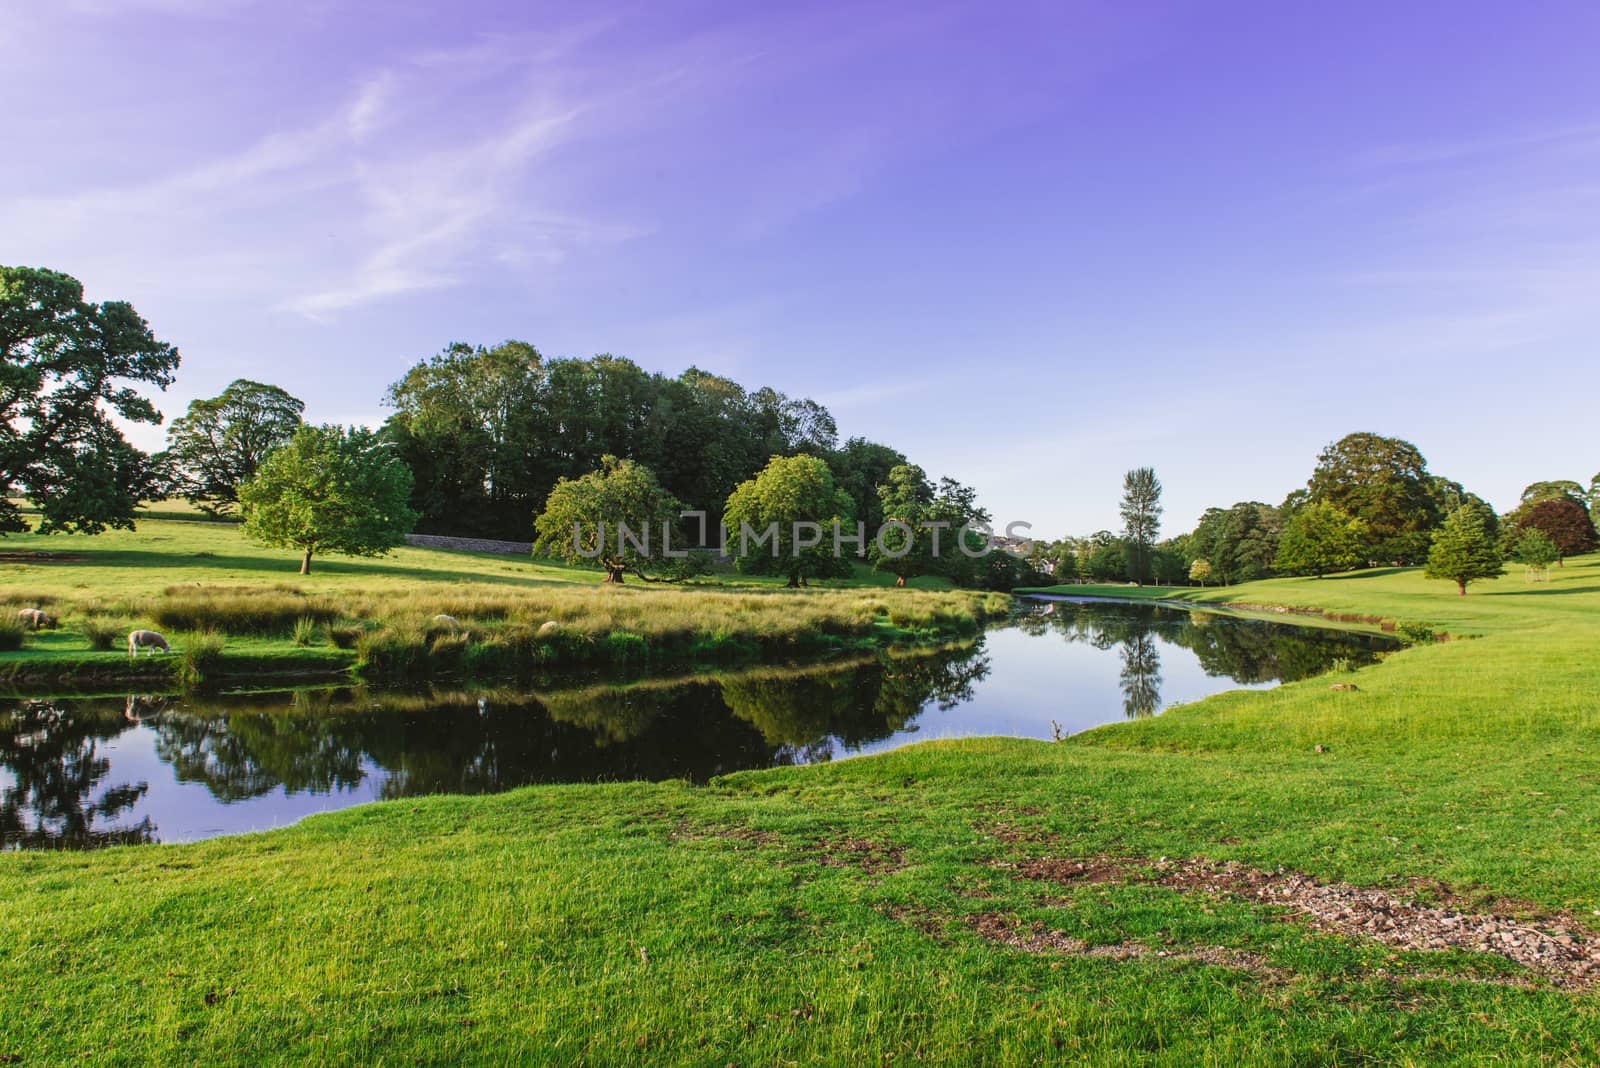 a bend in the River Bela at Dallam Park, Milnthorpe, Cumbria, England by paddythegolfer